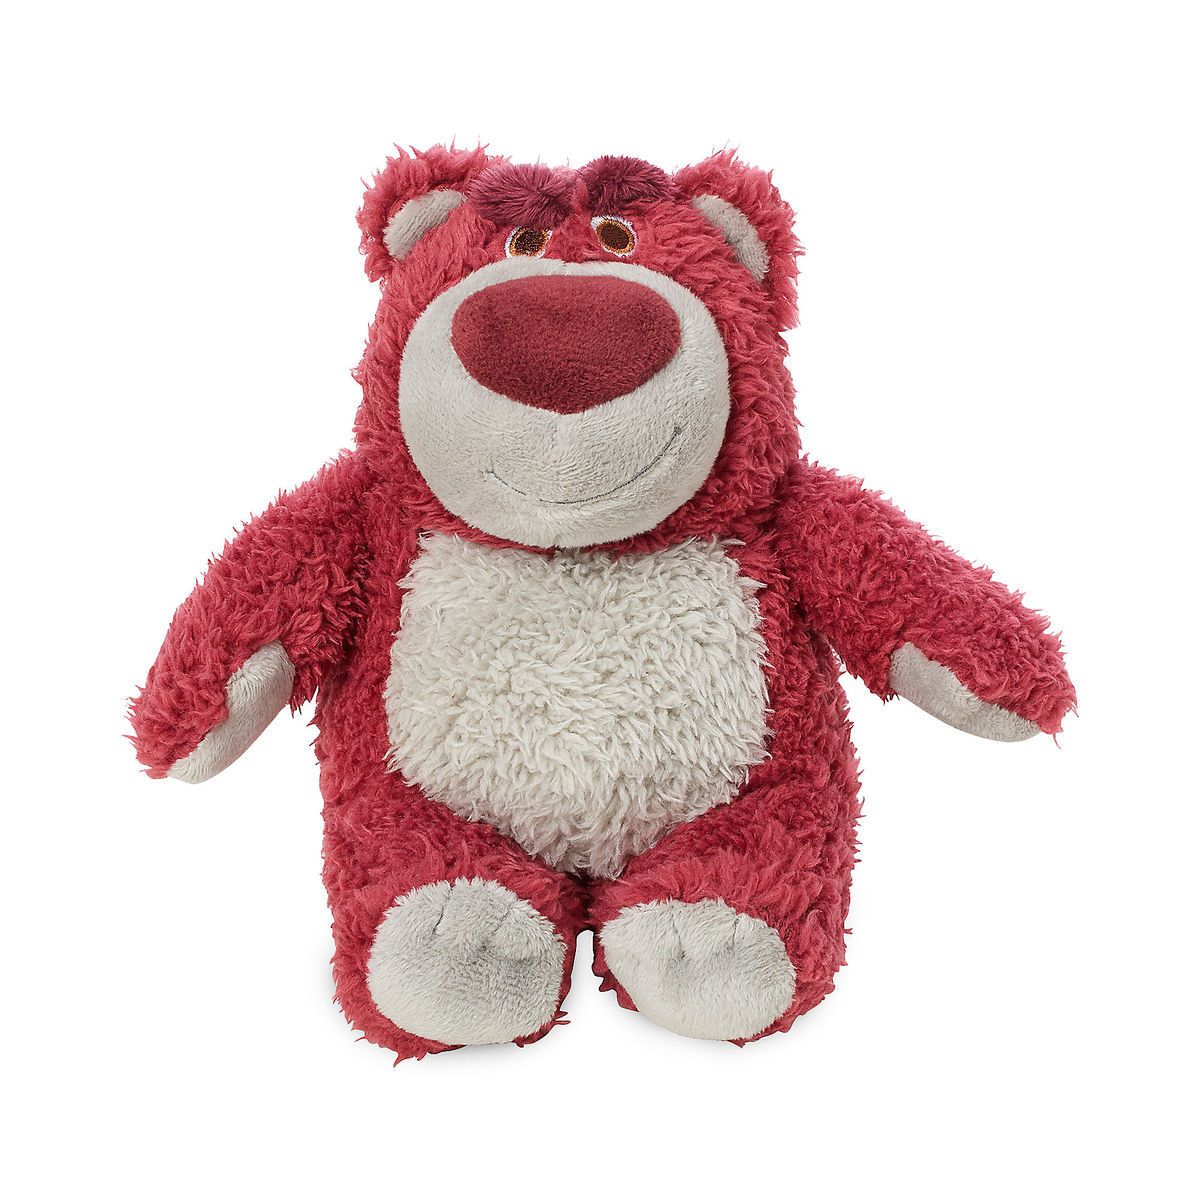 Toy Story 3 Lotso Plush [Strawberry Scented] - image 3 of 3